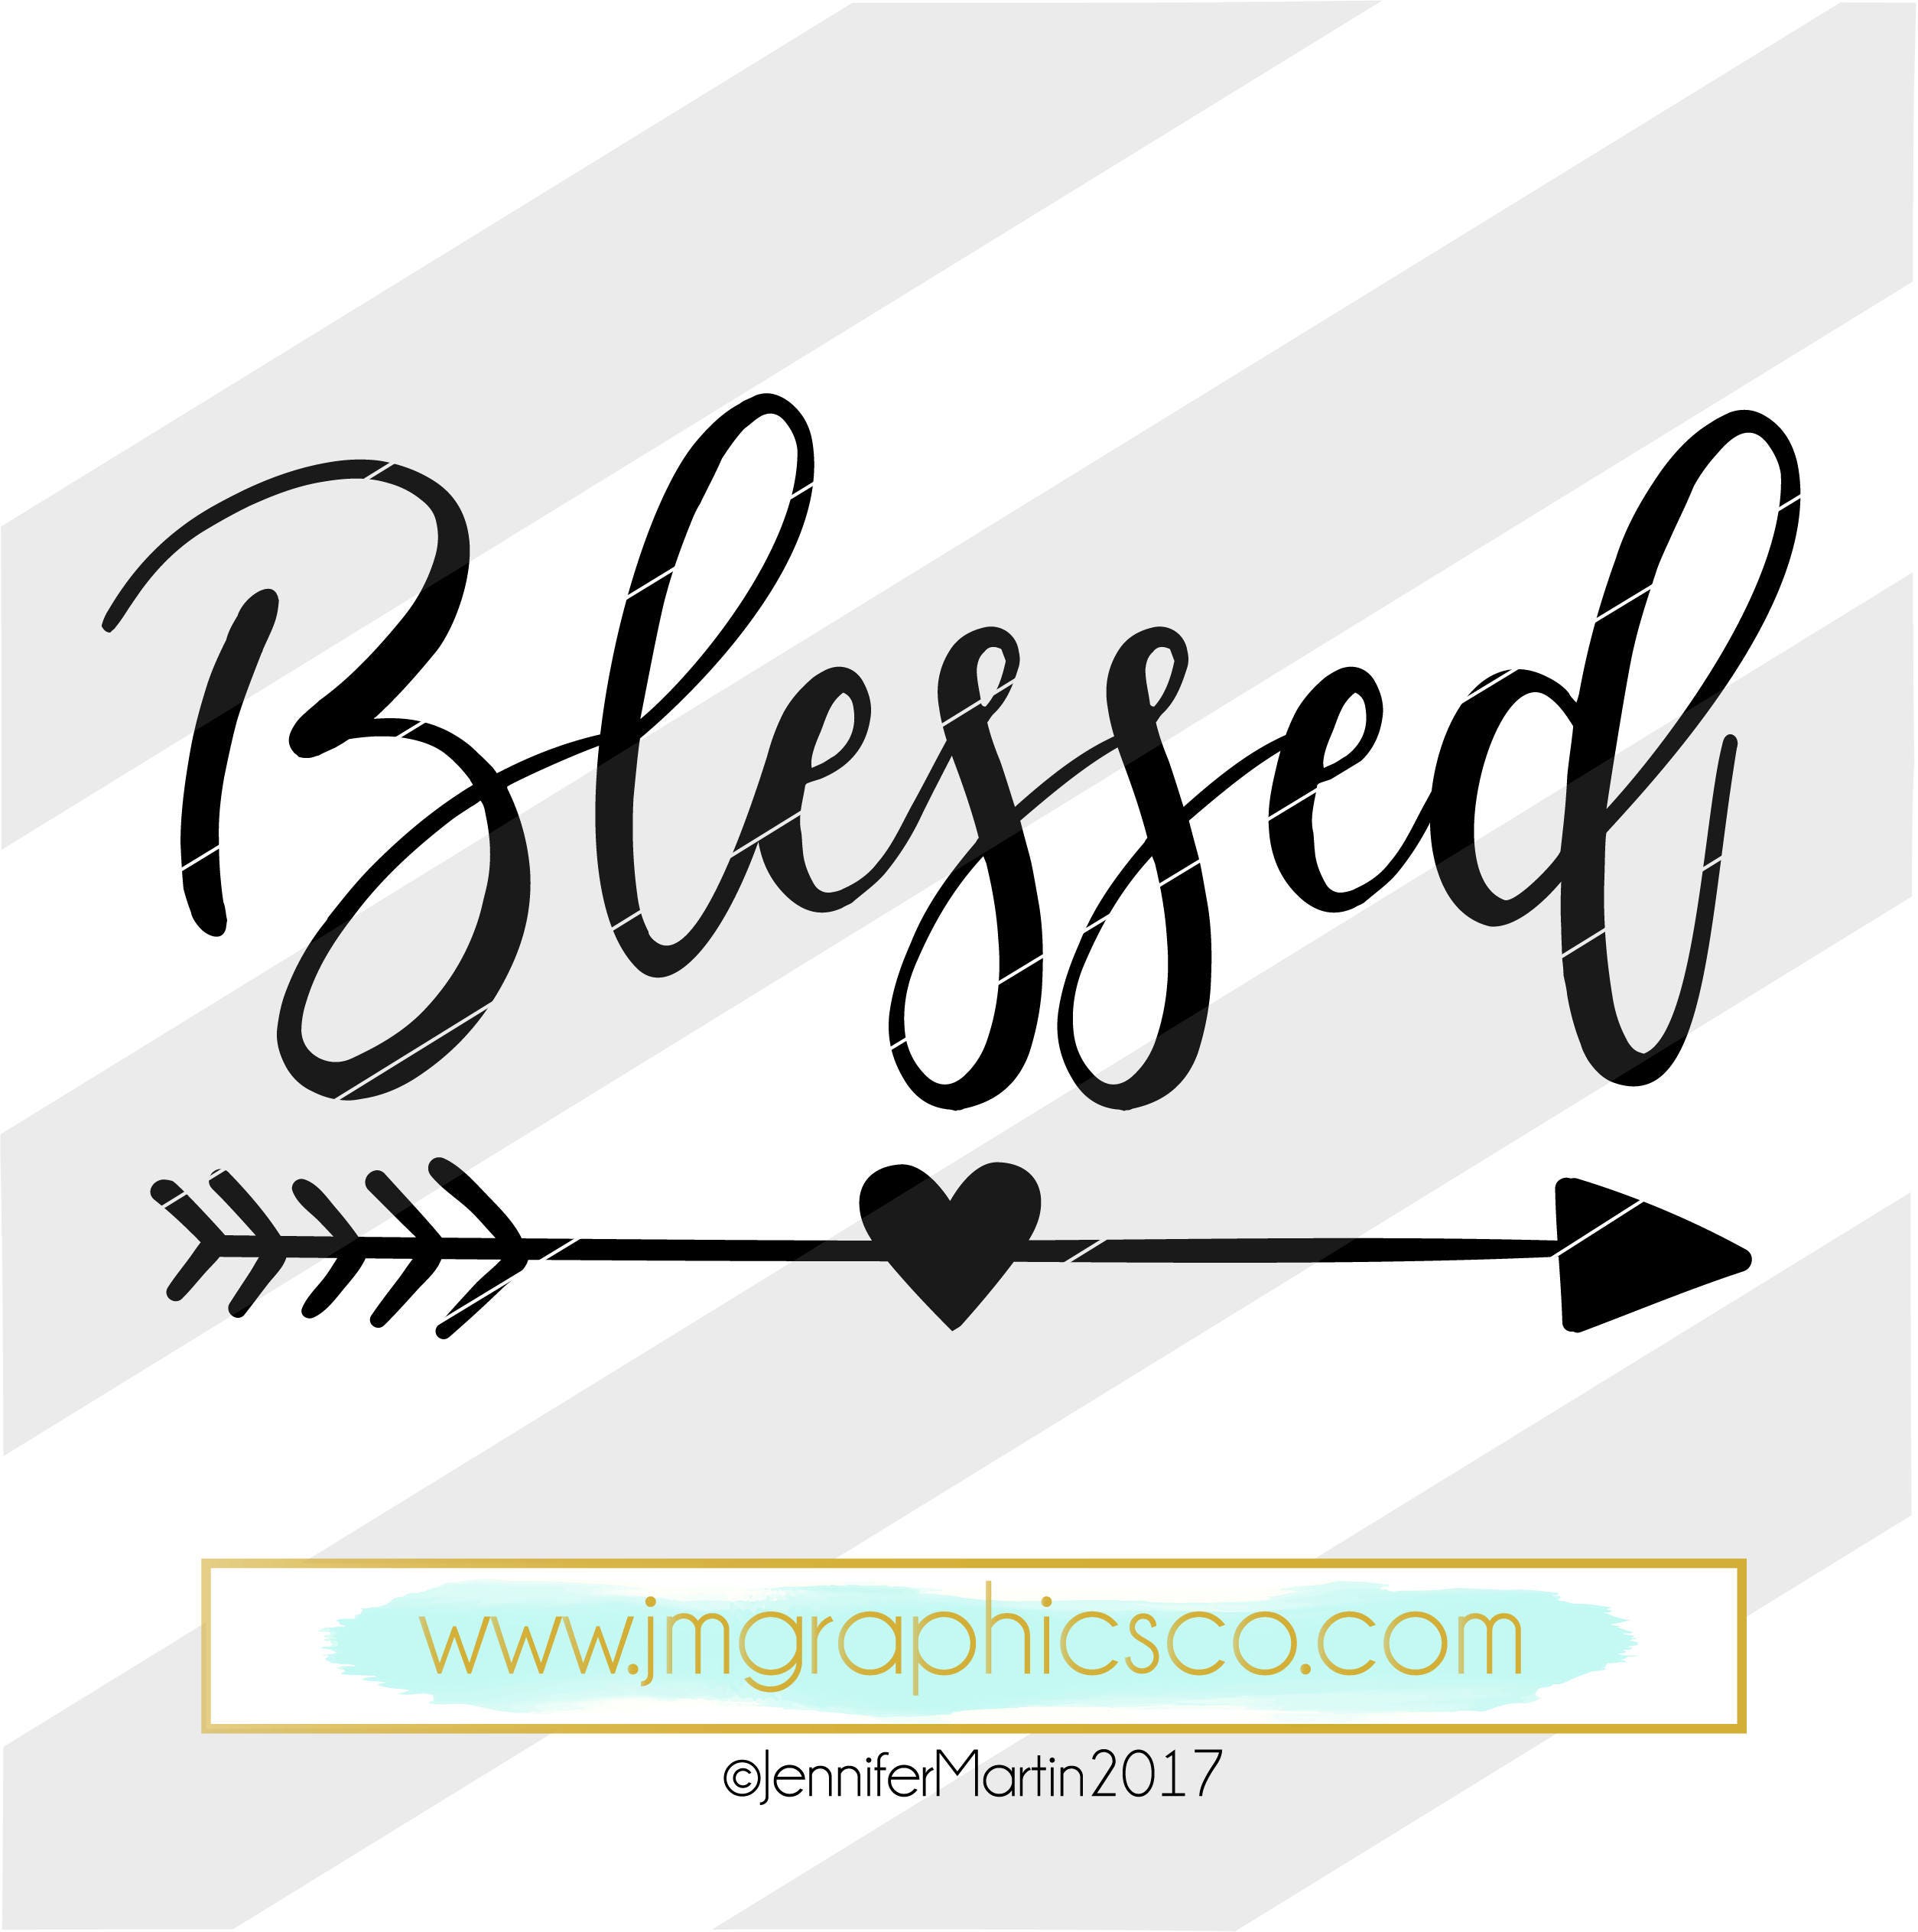 Blessed svg eps dxf png cricut cameo scan N cut cut